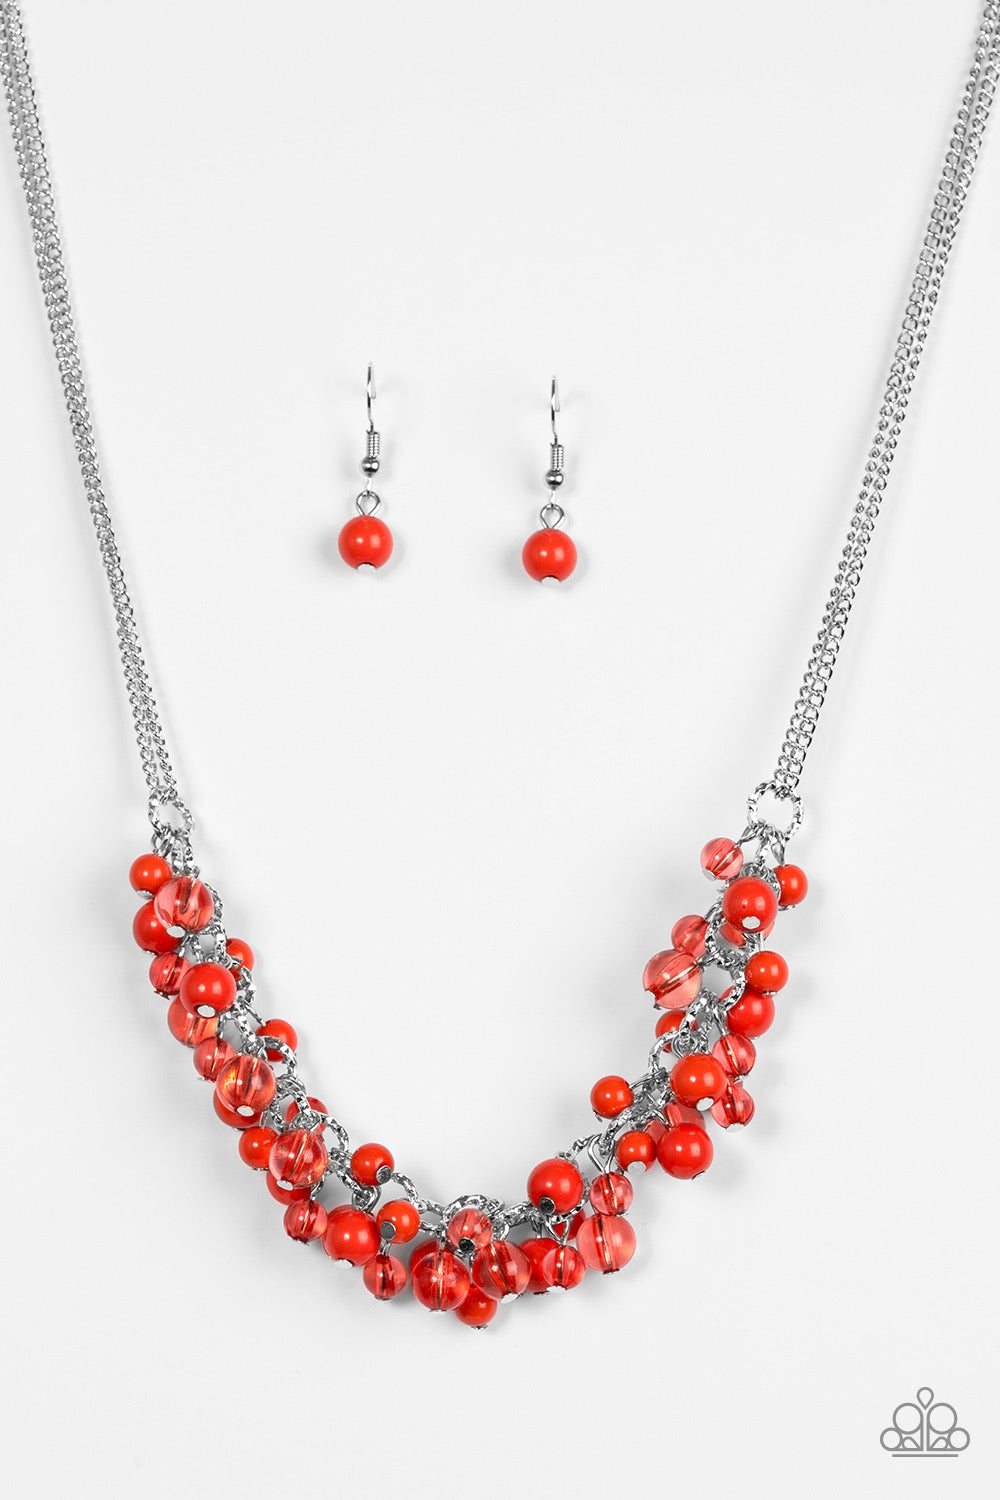 Boulevard Beauty - Red Beaded Necklace - Paparazzi Accessories